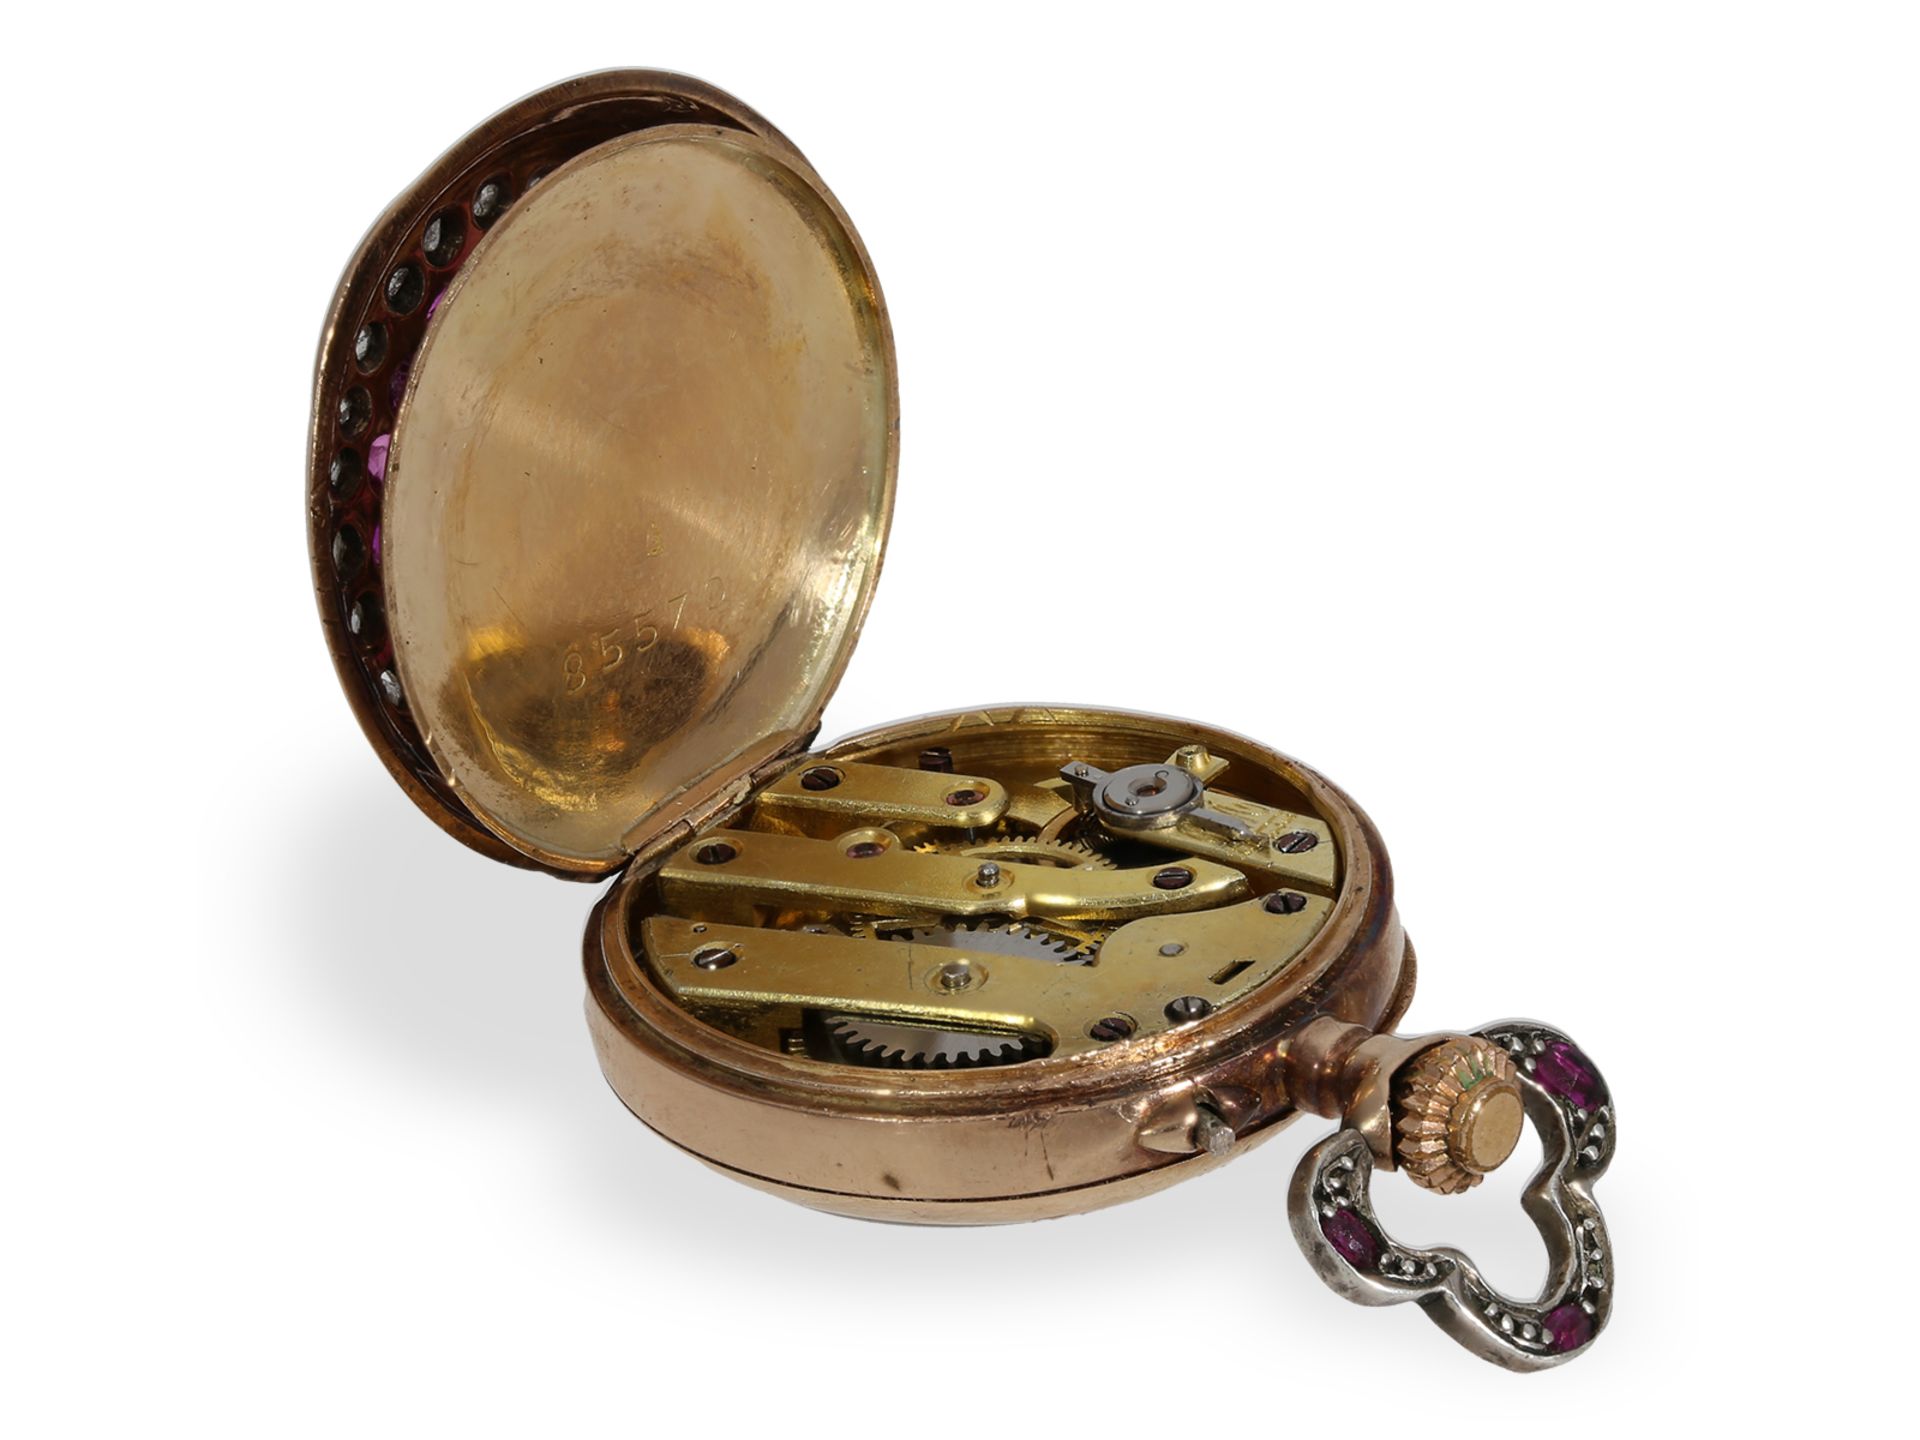 Pocket watch: rarity, miniature ladies' watch with high-quality stone setting, Lattes/ Le Coultre ar - Image 4 of 6